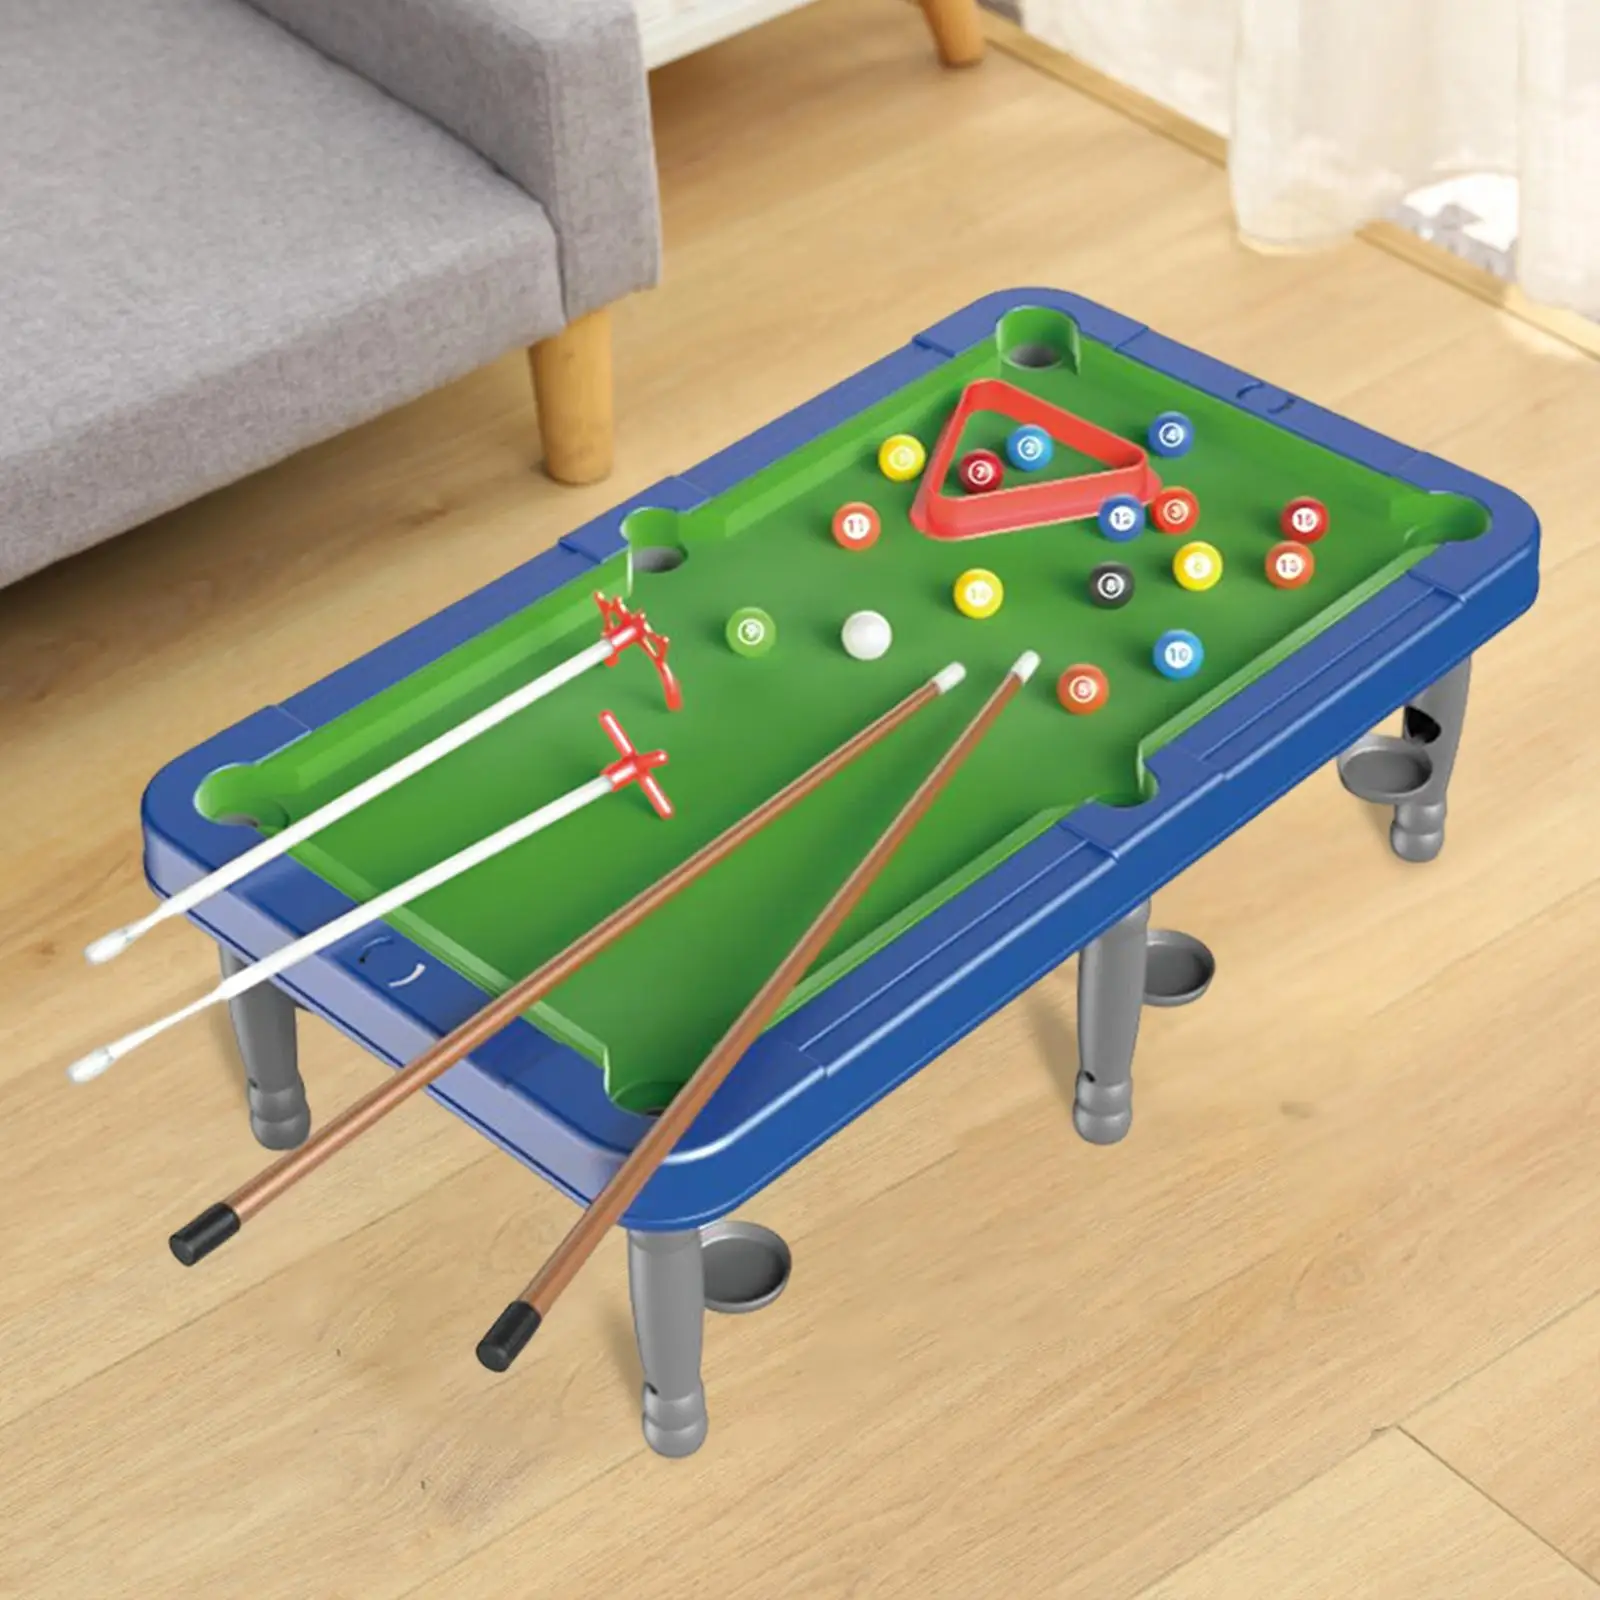 Desktop Snooker Interaction Toys Board Games Small Tabletop Billiards for Adults